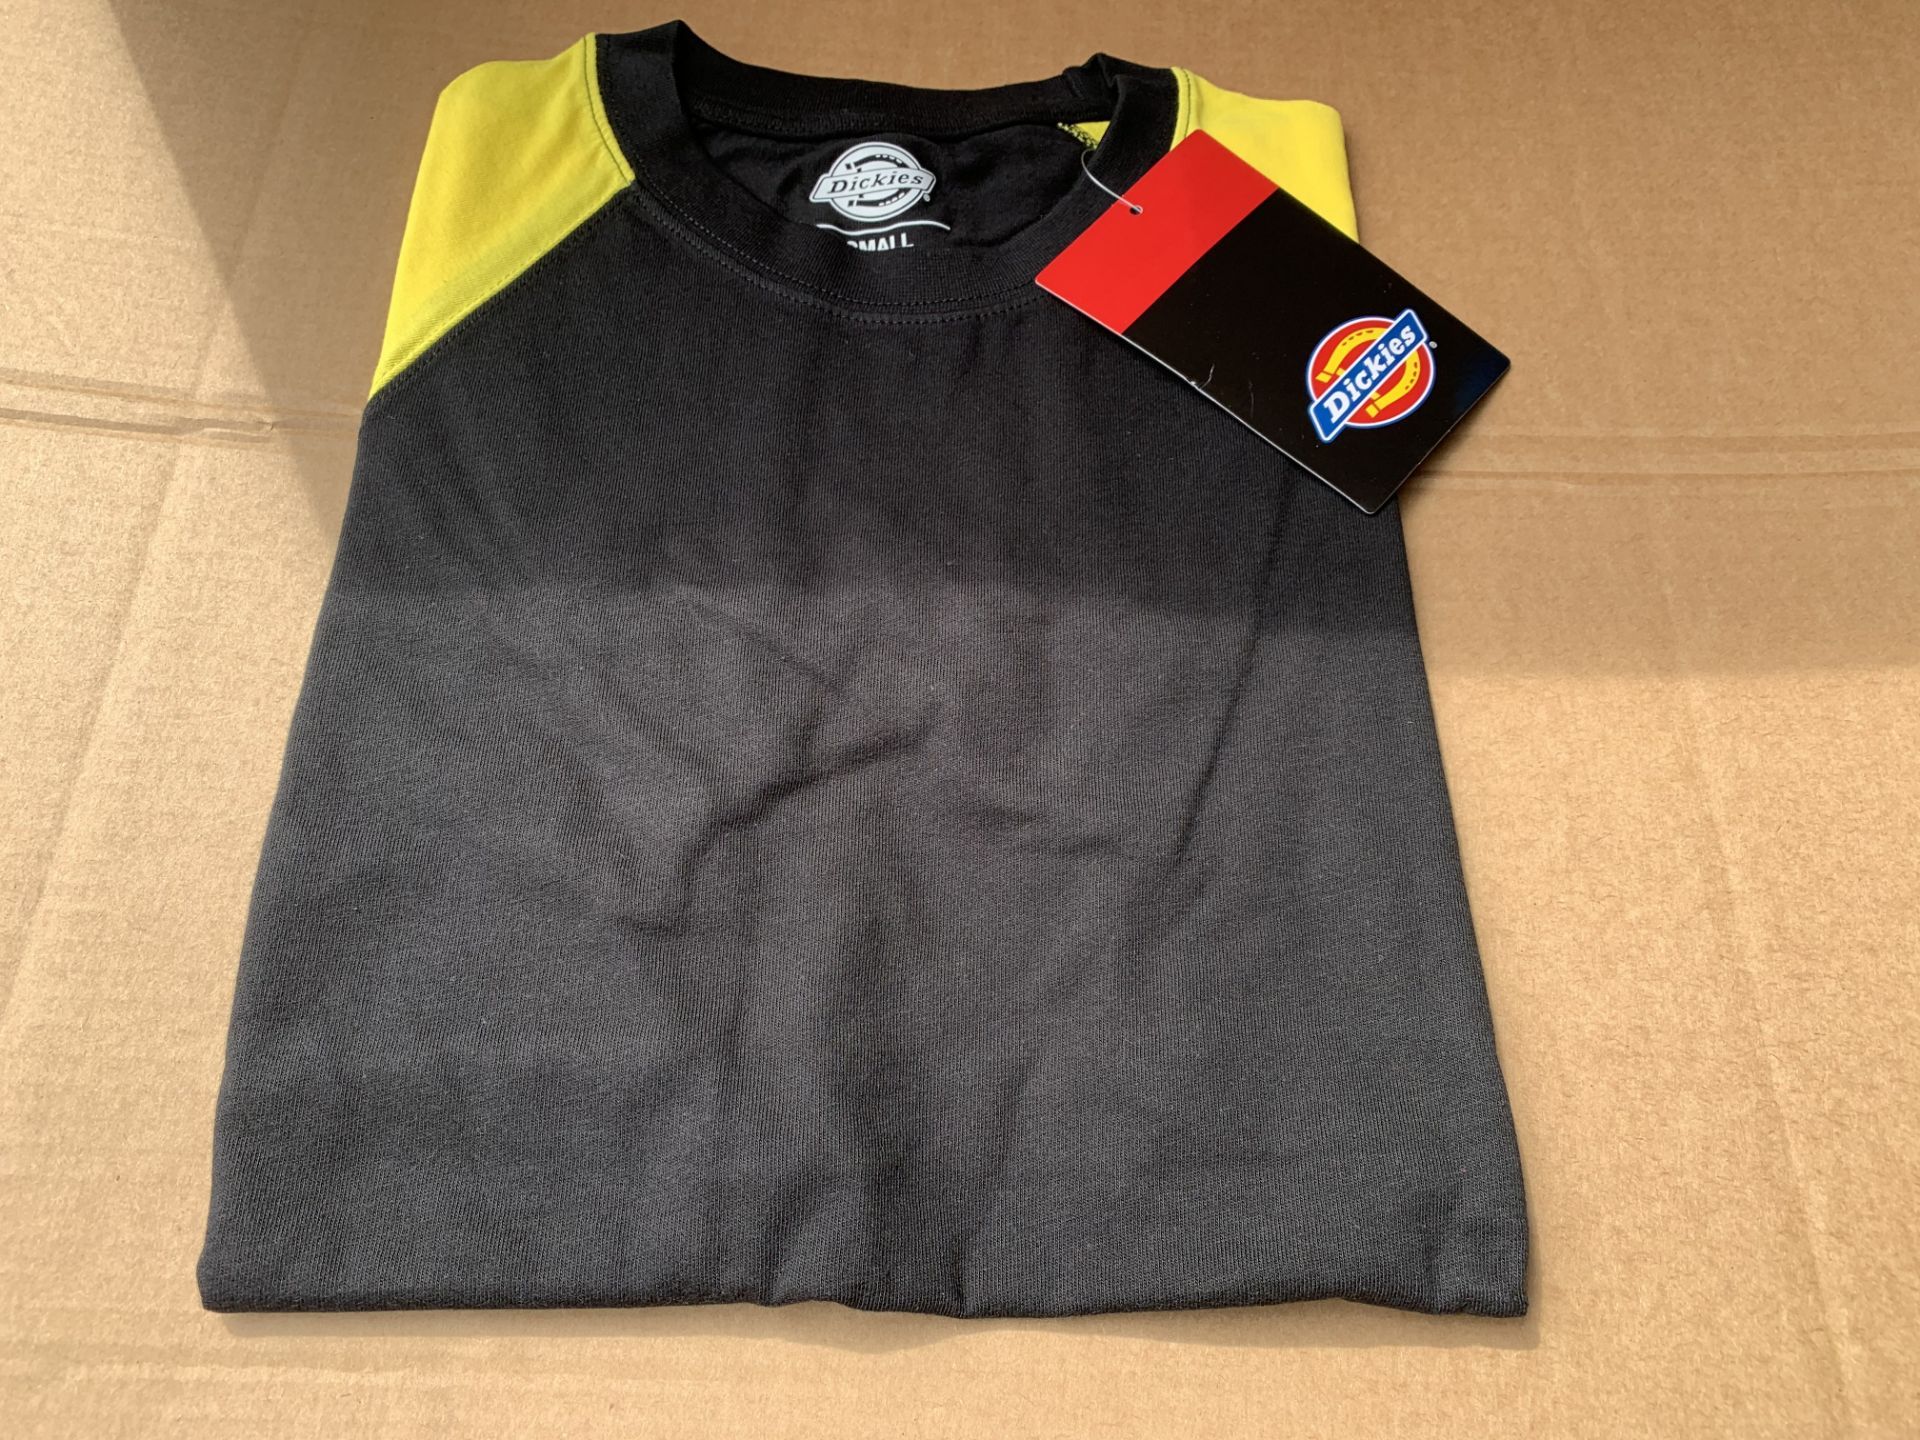 5 X BRAND NEW DICKIES BLACK/YELLOW TWO TONE T-SHIRTS SIZE SMALL (1211/1)